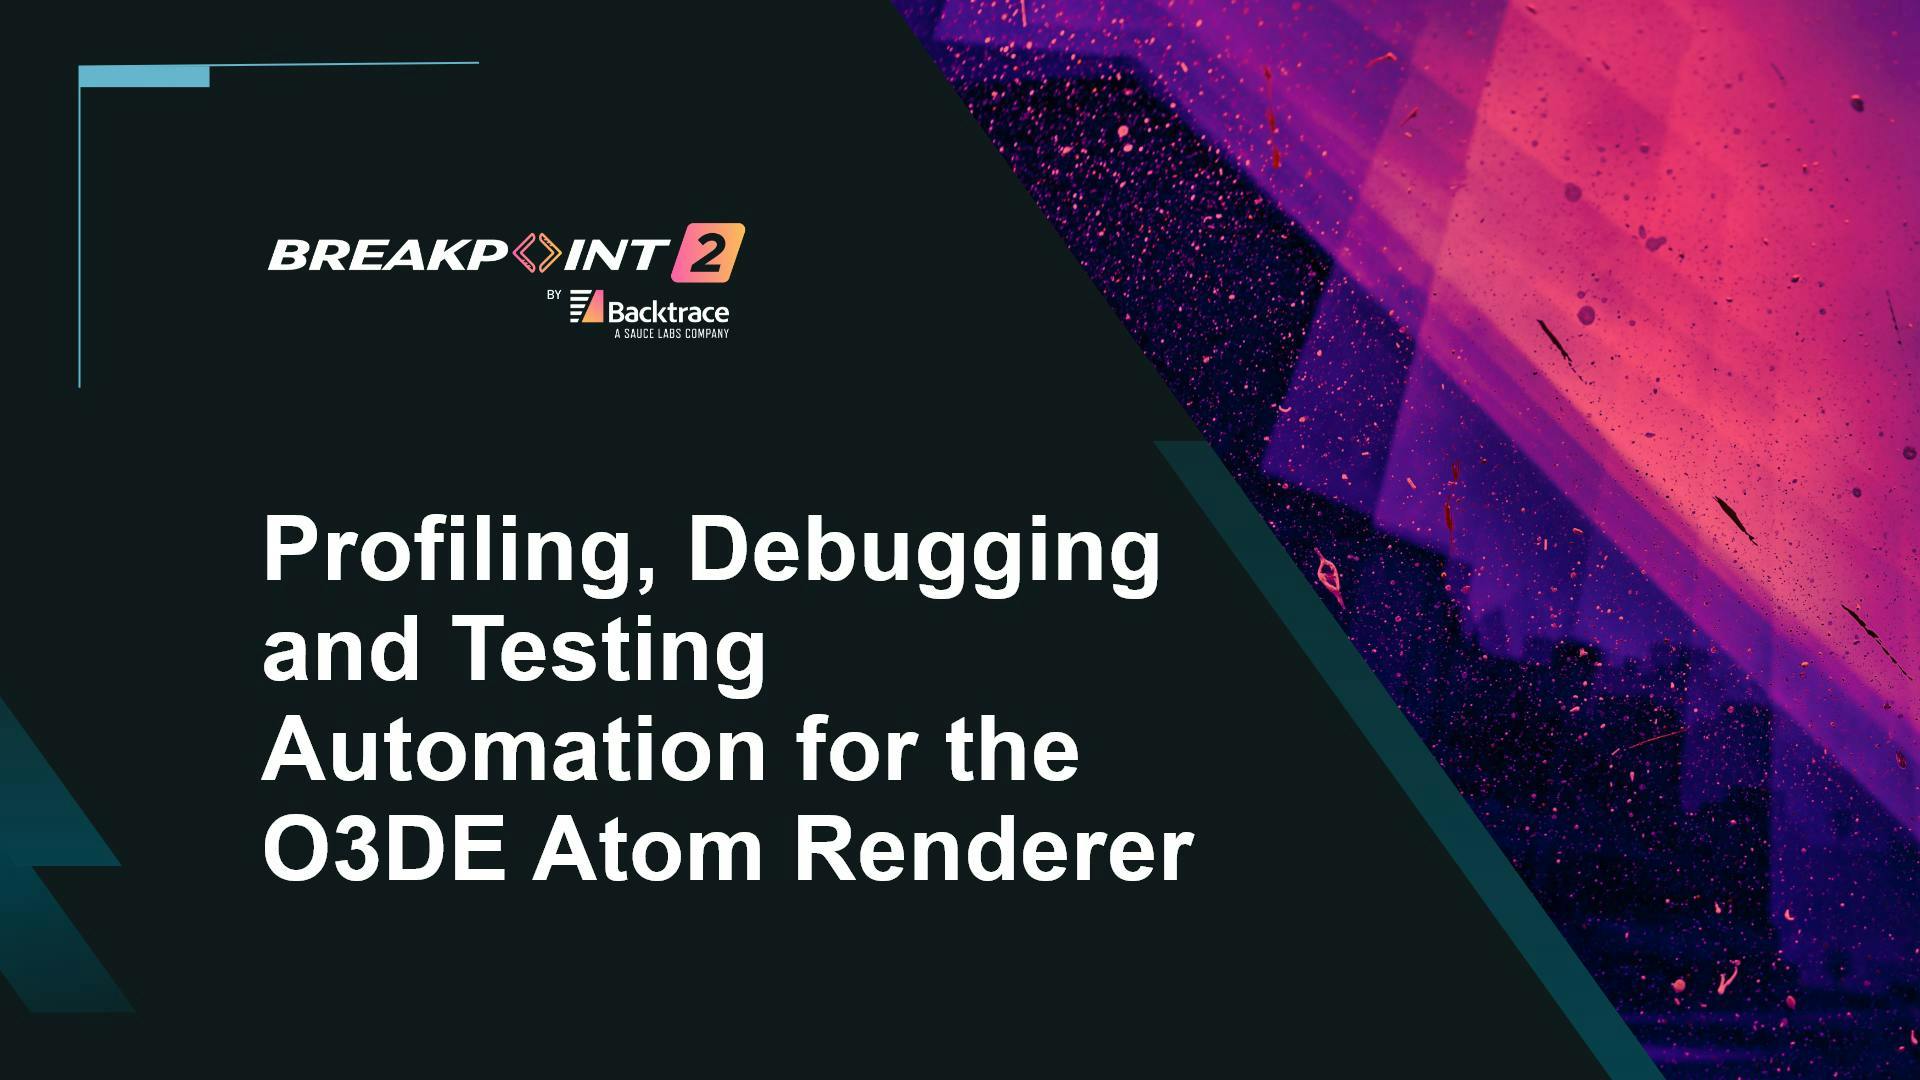 Profiling, Debugging and Testing Automation for the O3DE Atom Renderer